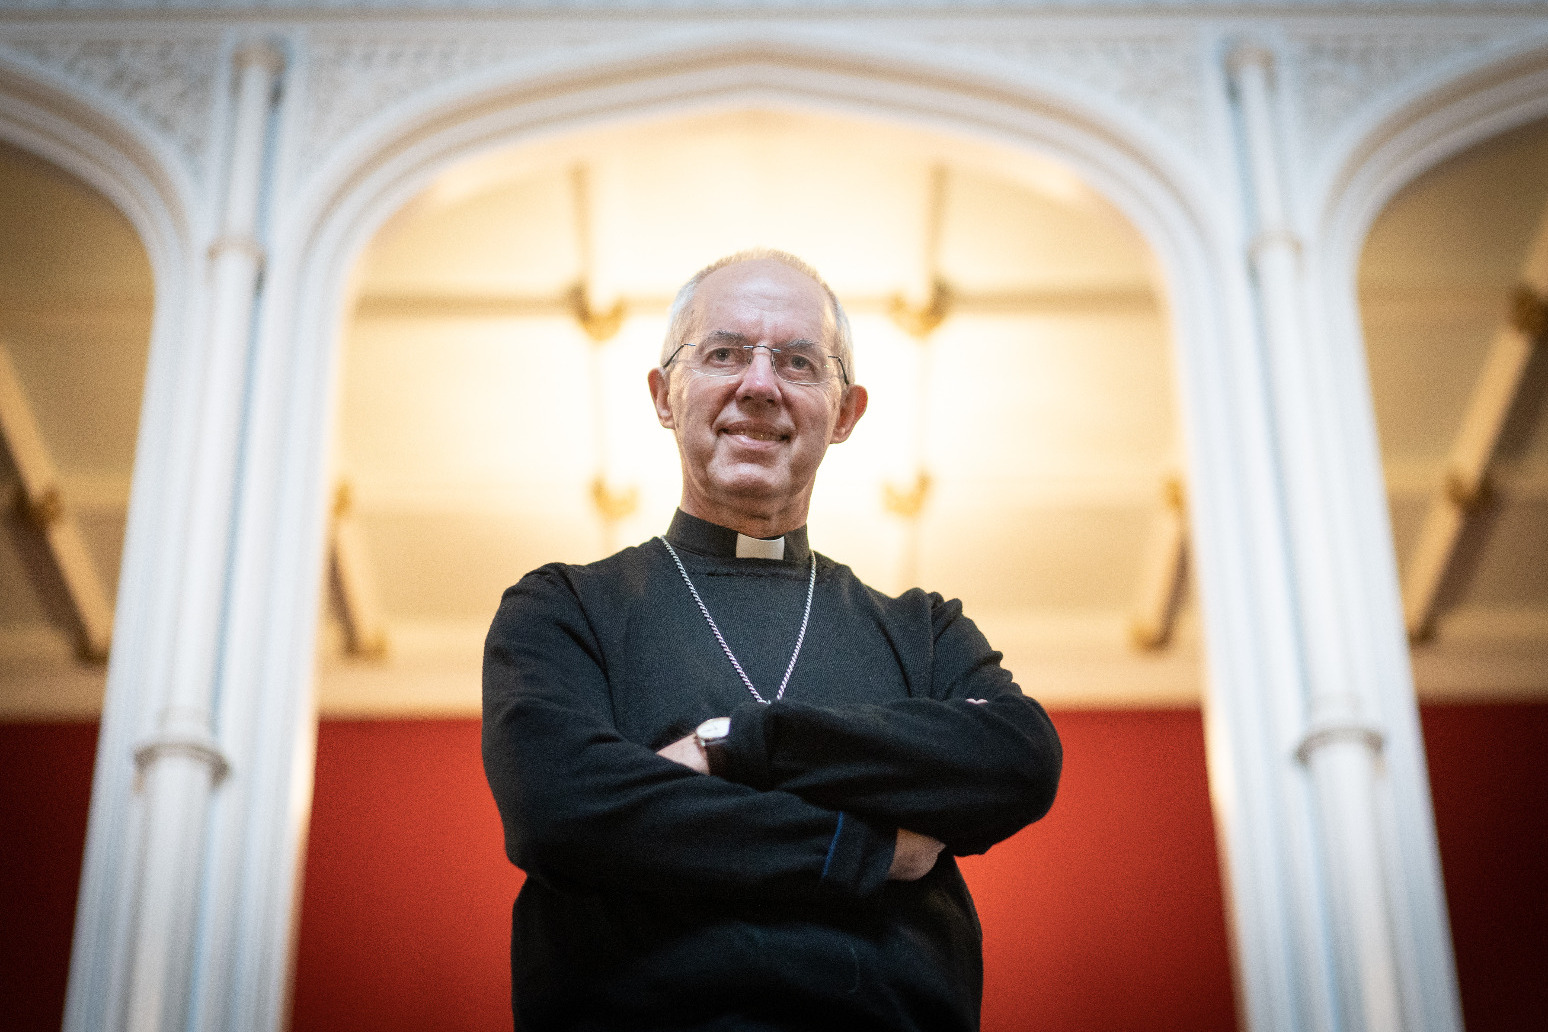 Be bolder, Archbishop of Canterbury urges leaders ahead of Cop26 climate summit 